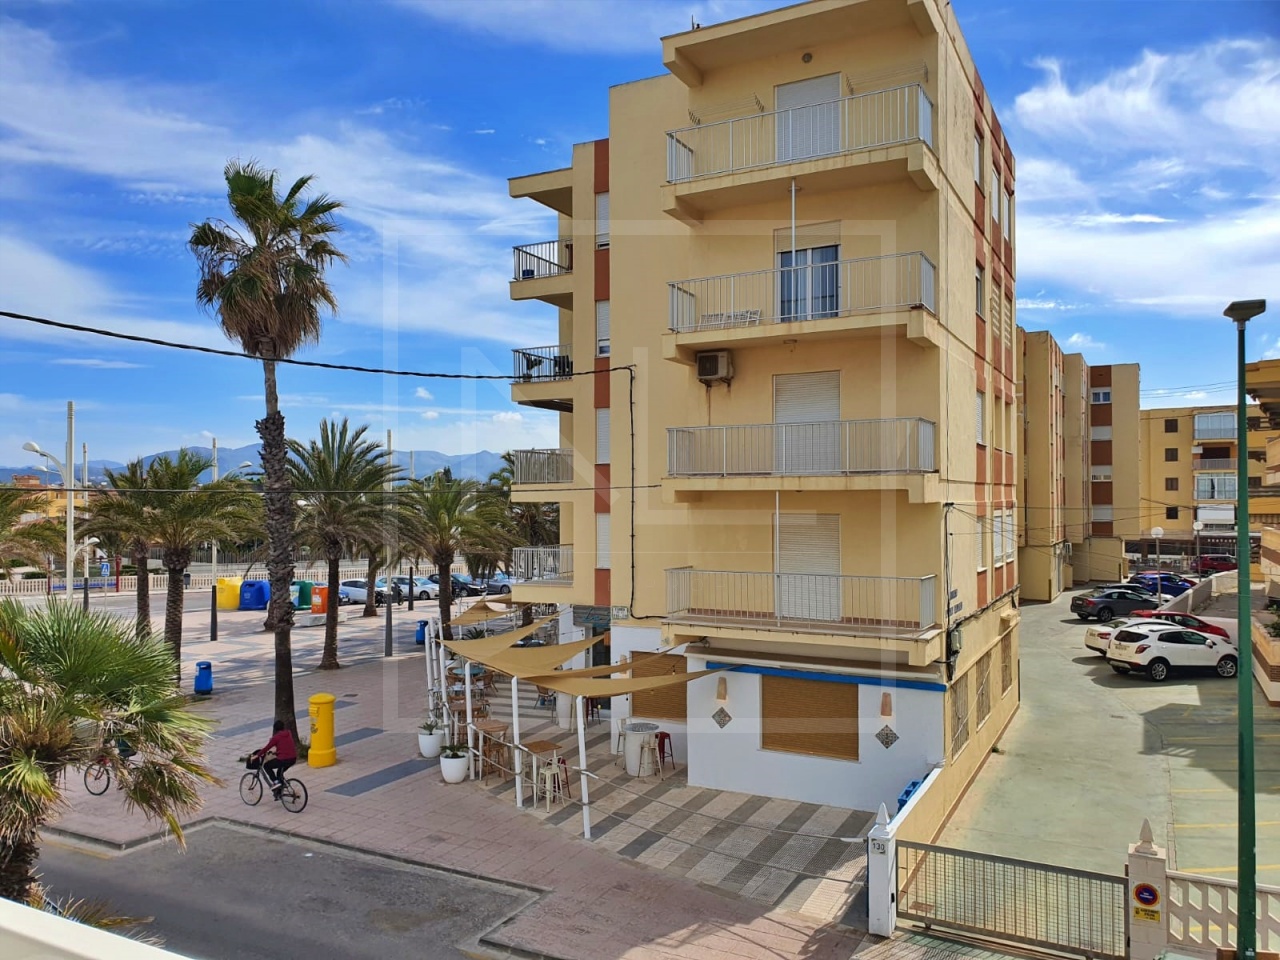 3 bedroom 2 bathroom penthouse apartment For Sale in Oliva